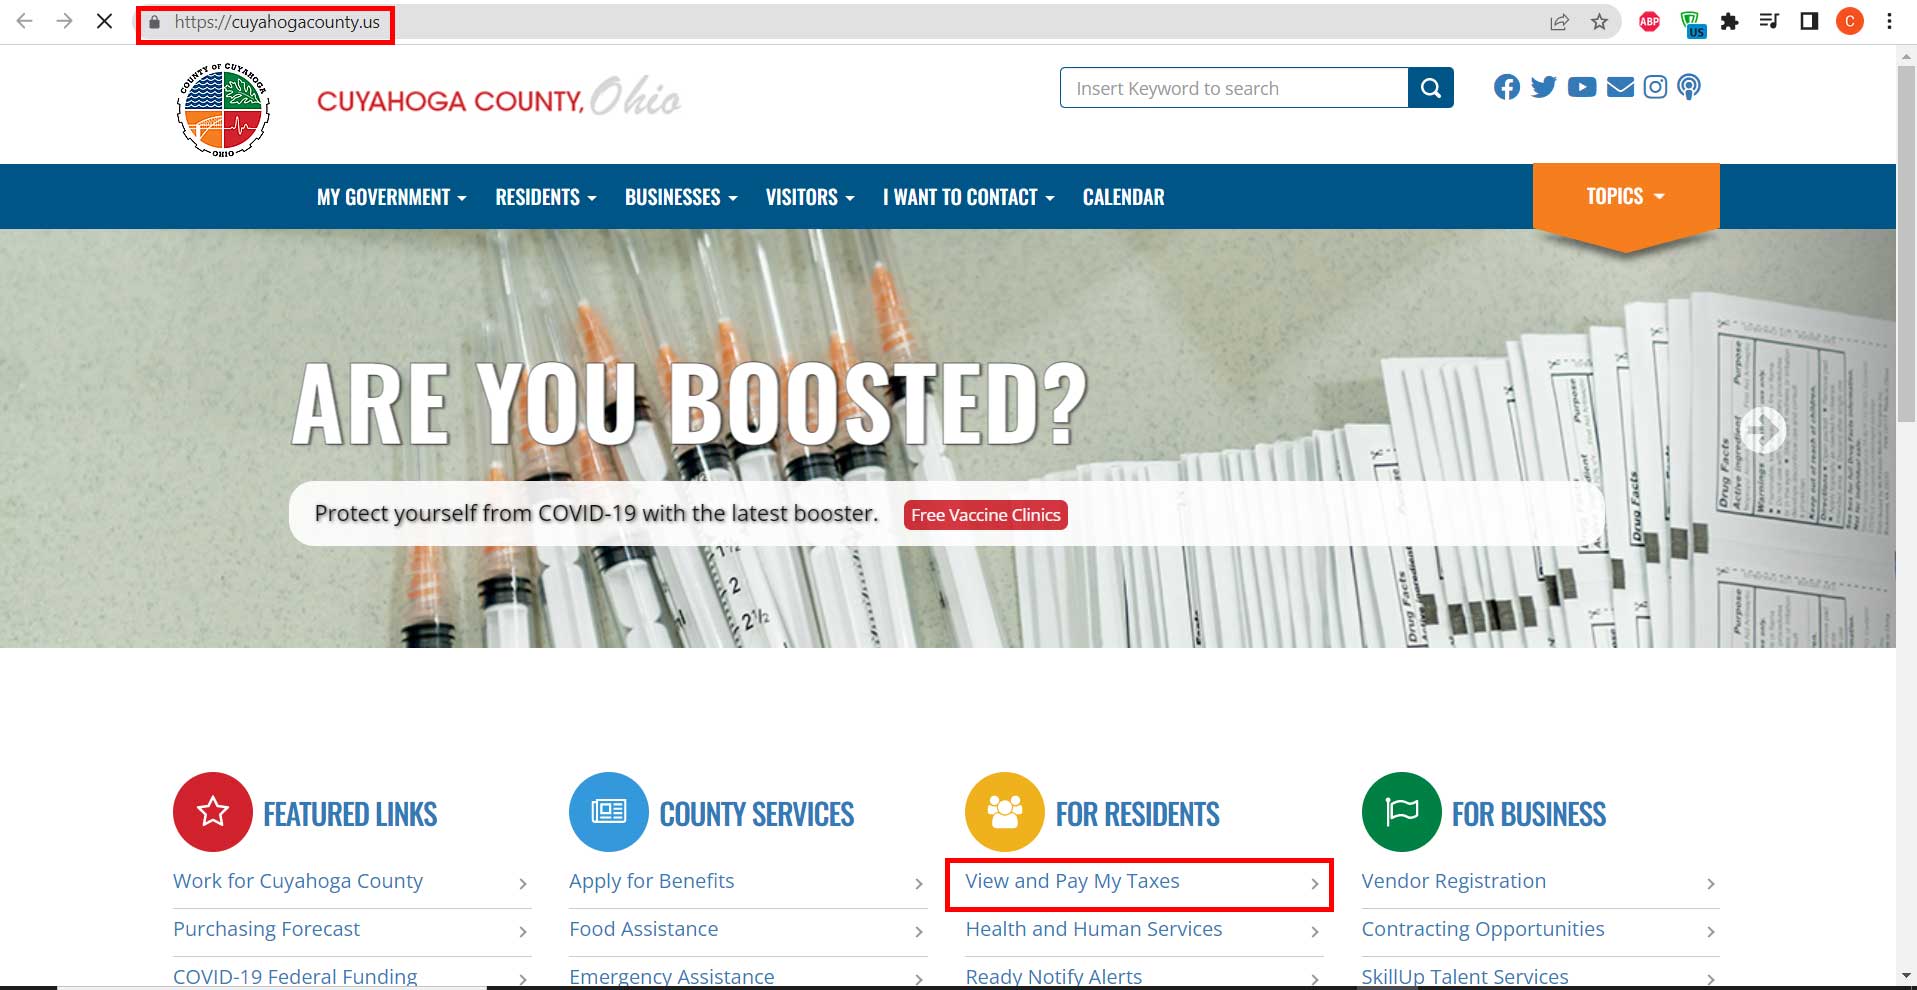 Enter to Cuyahoga Website for Property Tax